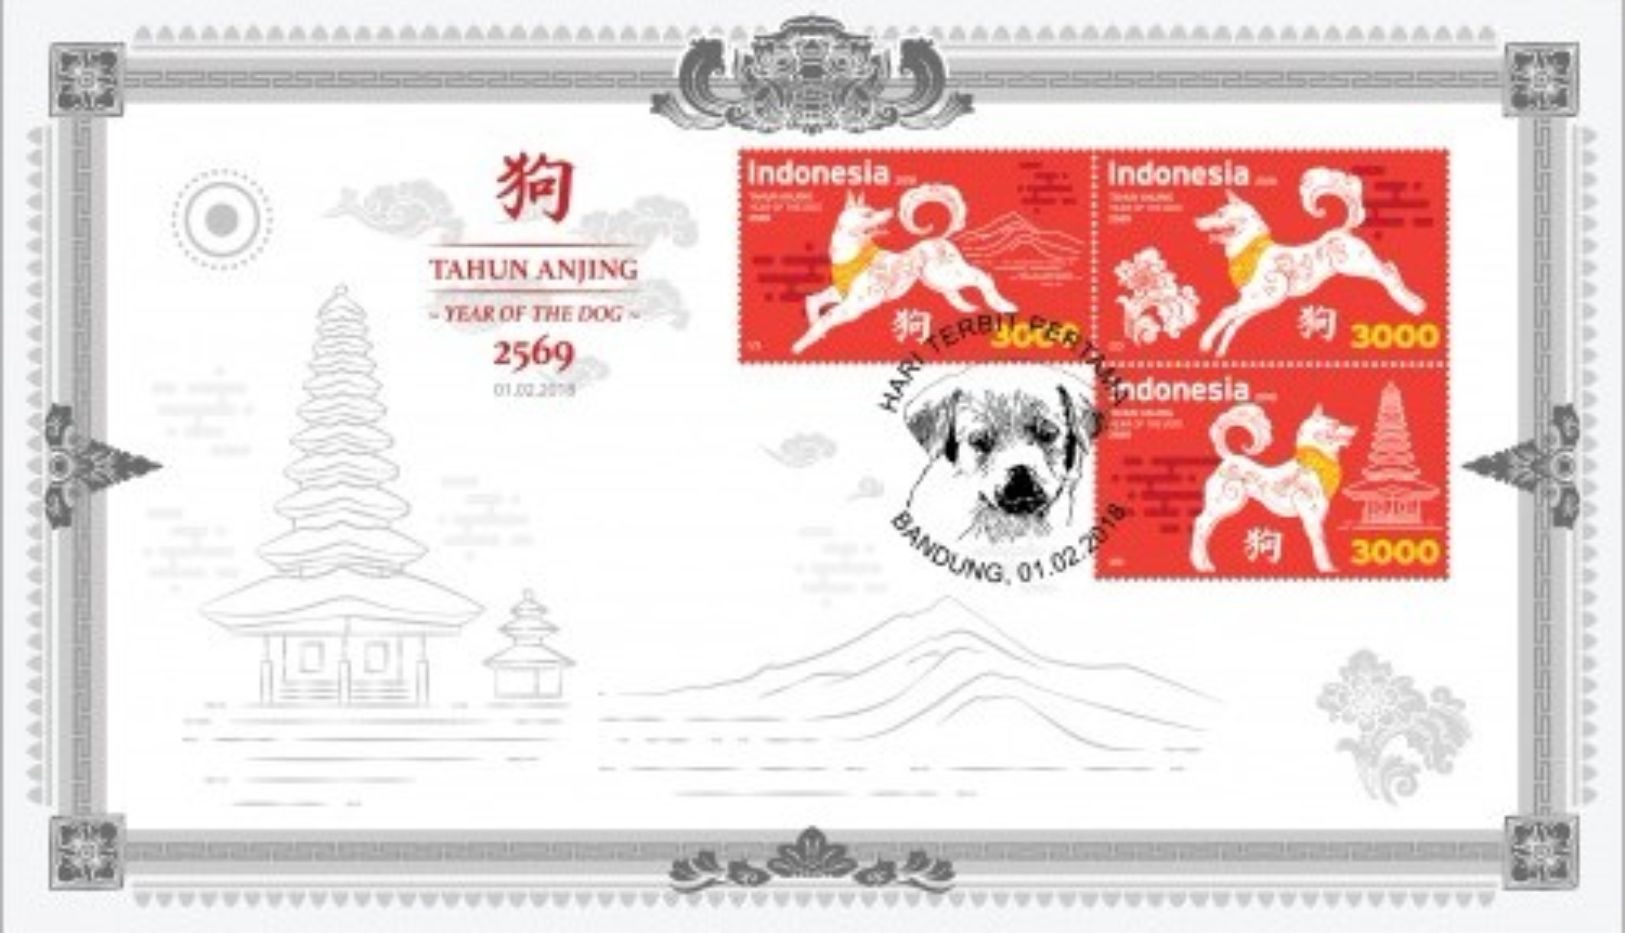 Indonesia FDC 01.02.2018 The Year Of The Dog - Indonesia